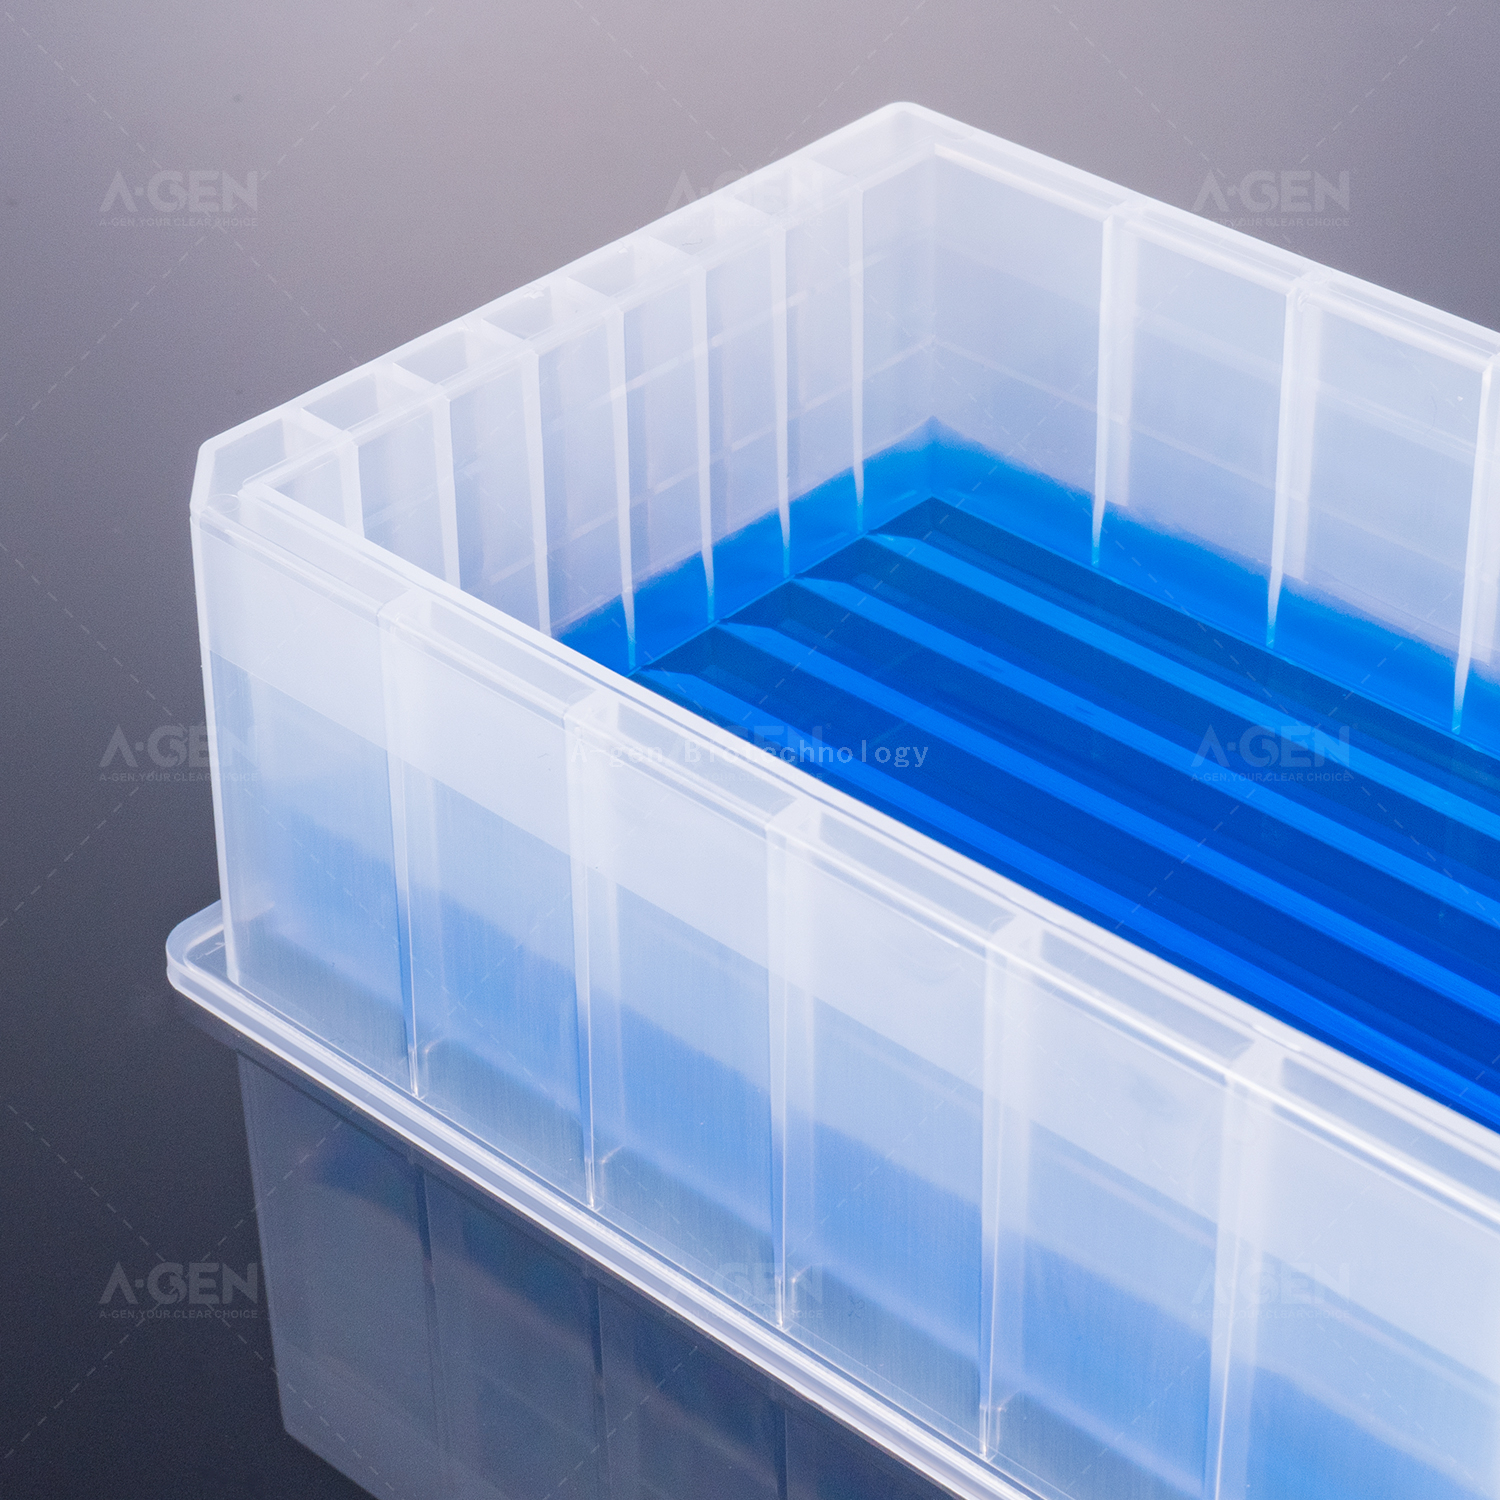 290mL 8-Channel Bottom Trough Reagent Reservoirs High Profile